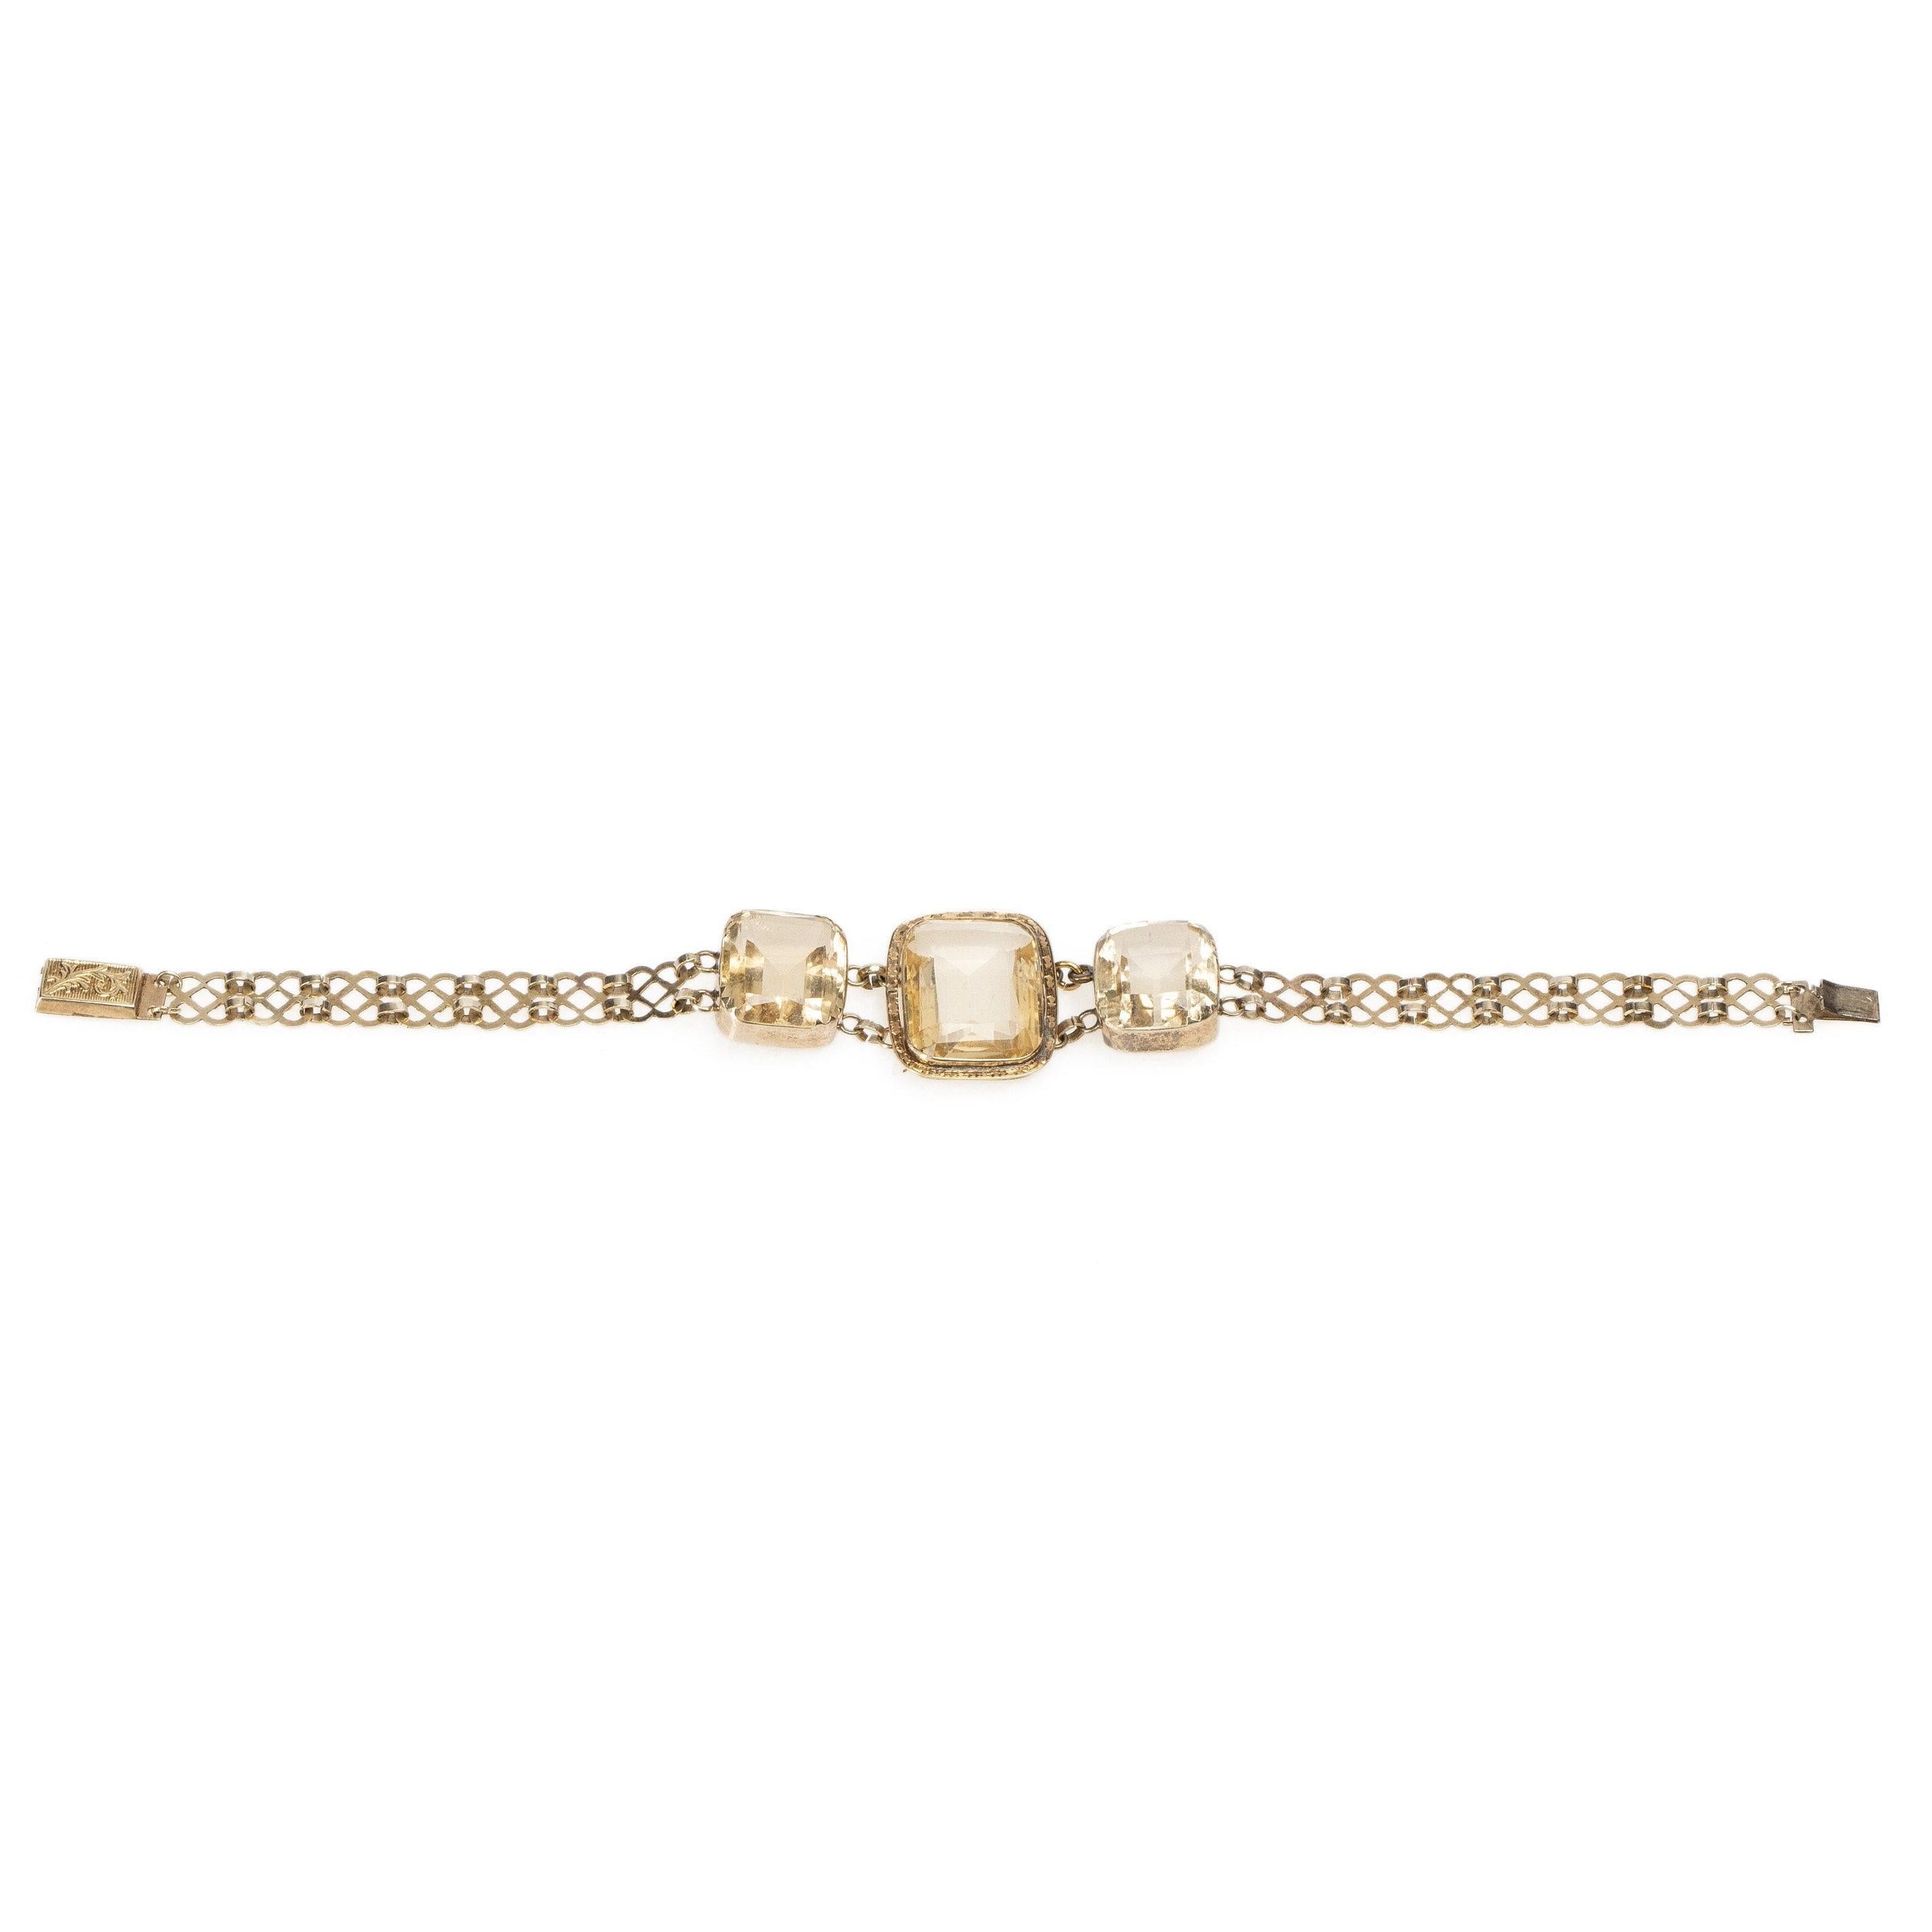 Here we have a simple and elegant statement bracelet. Crafted in 10K yellow gold this art deco ring has beautiful muted color, that gives ,some extra sparkle without being over the top. The lattice style links are the perfect compliment to the big